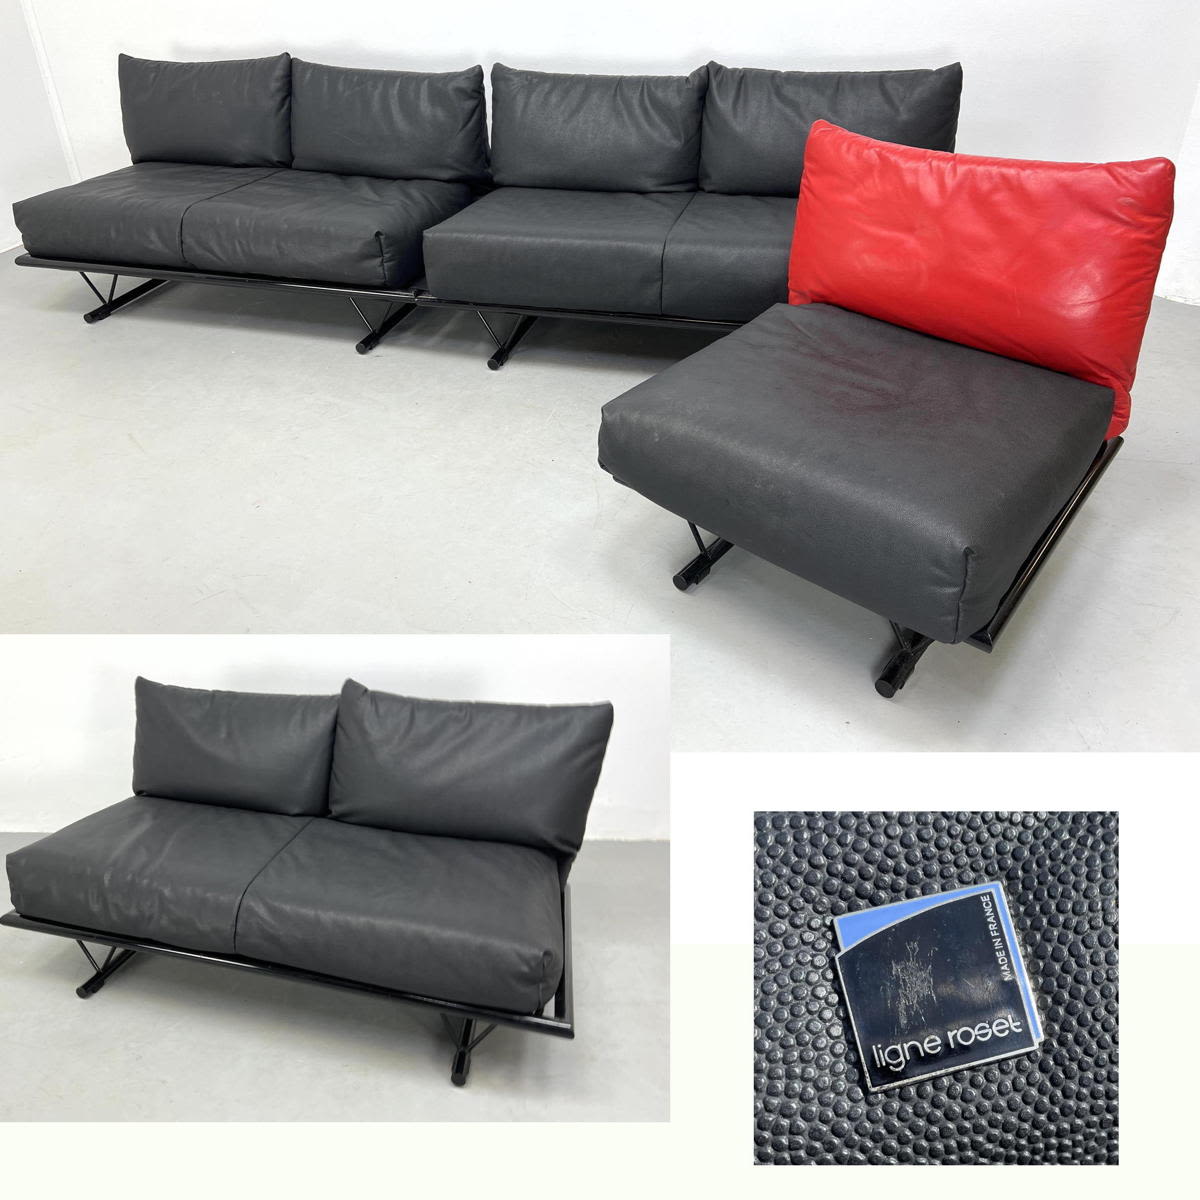 4pcs Black and red vinyl 3 pc couch 2bb06e